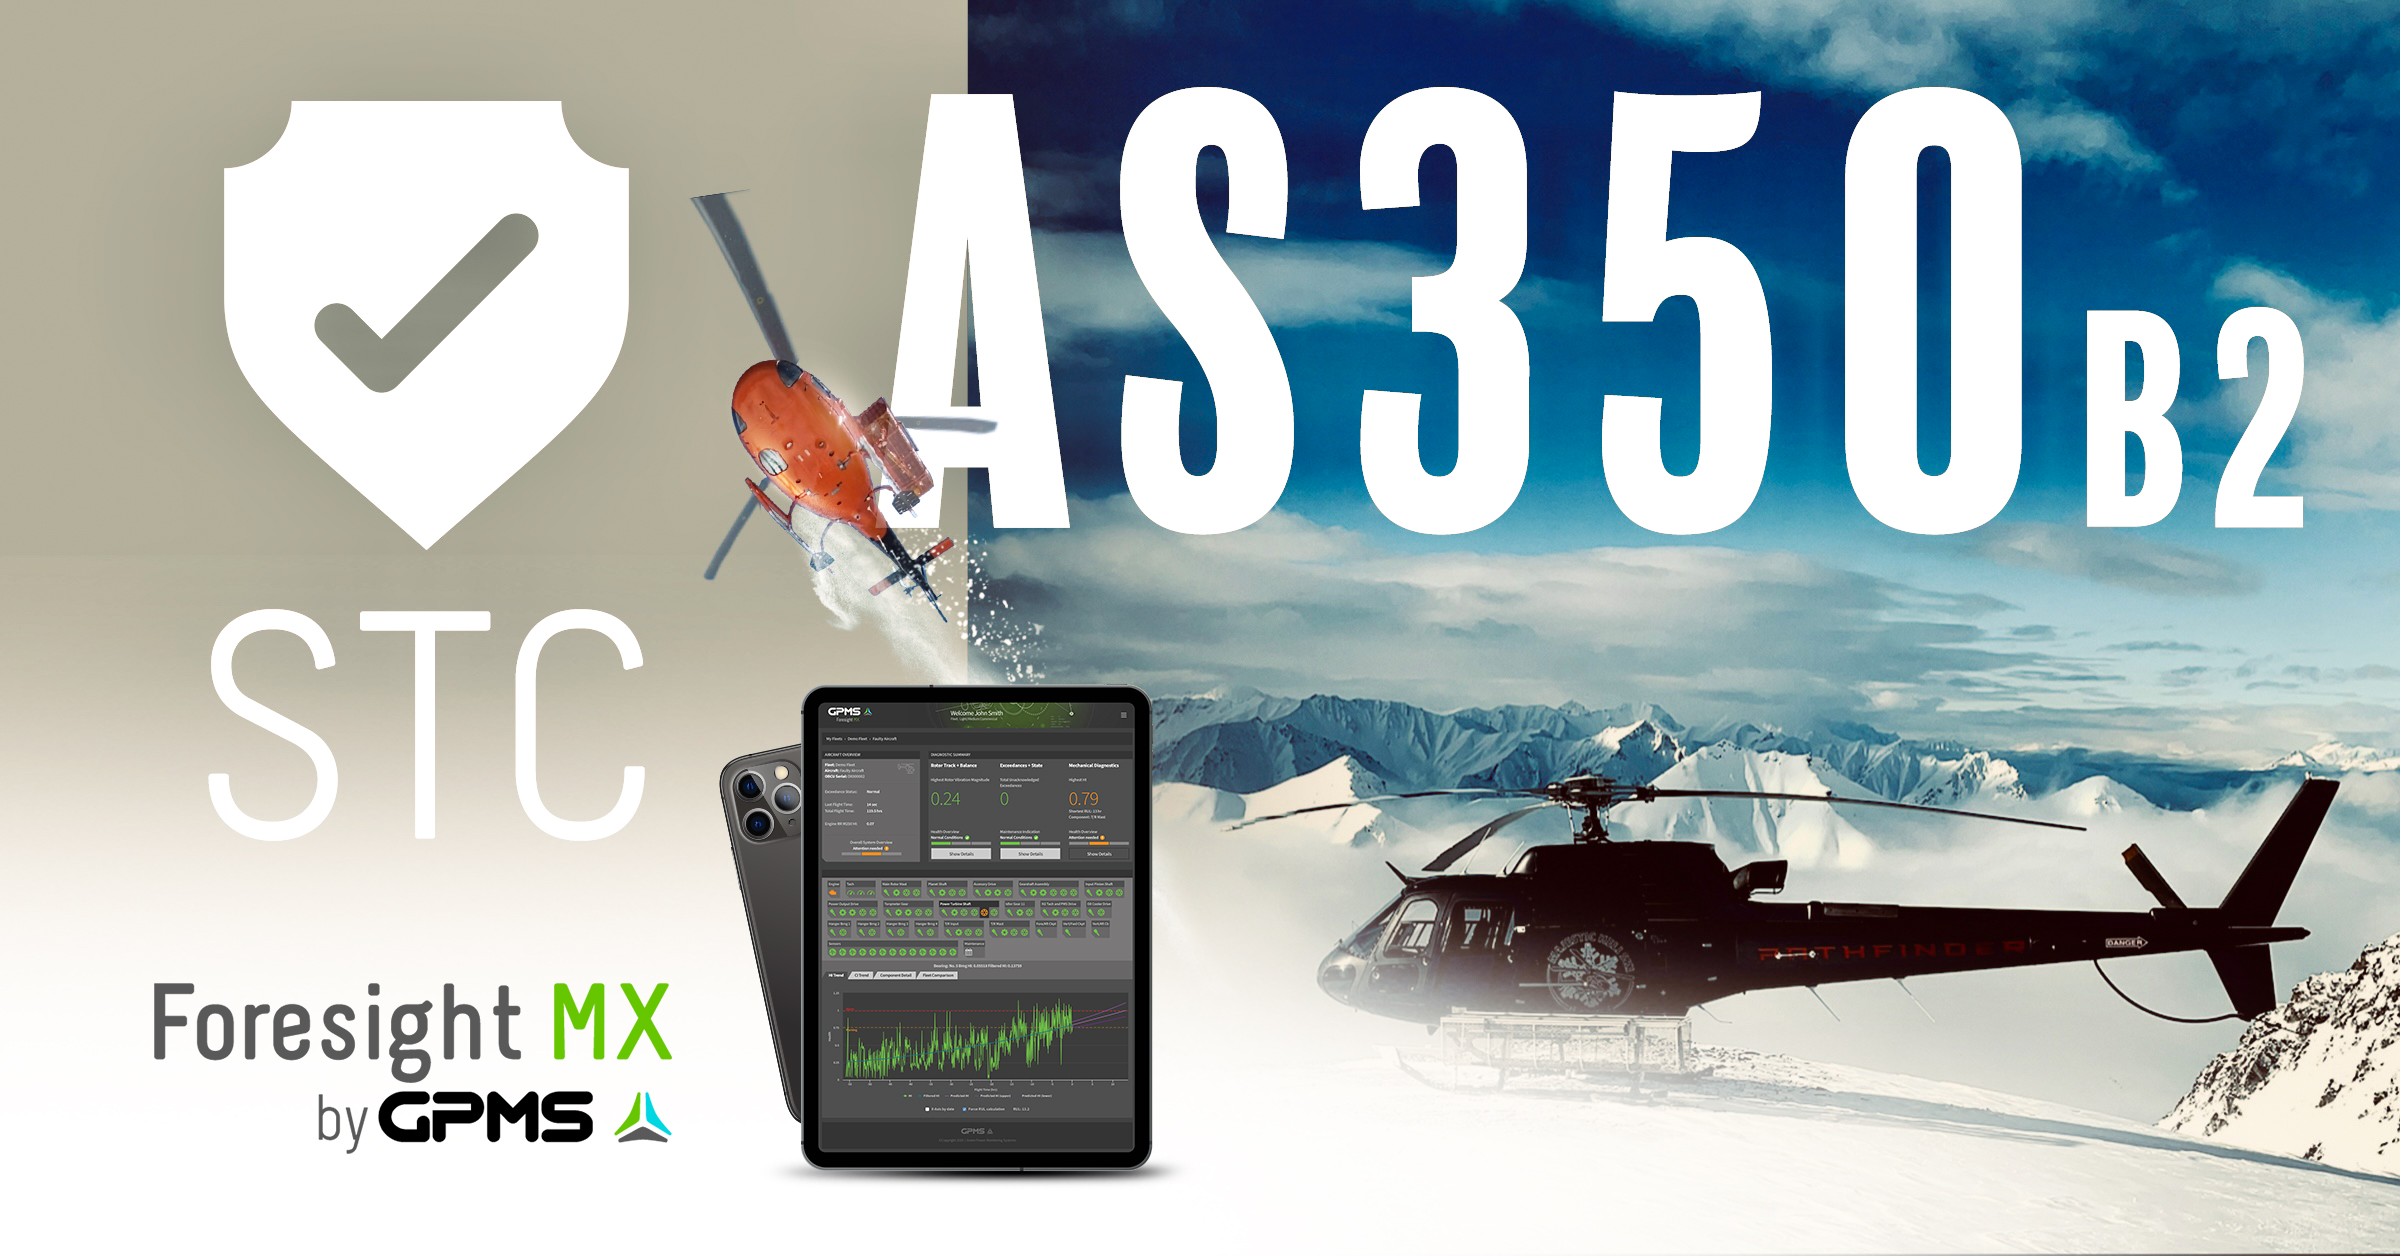 PRESS RELEASE: GPMS Continues Foresight MX HUMS Expansion across Airbus Platforms